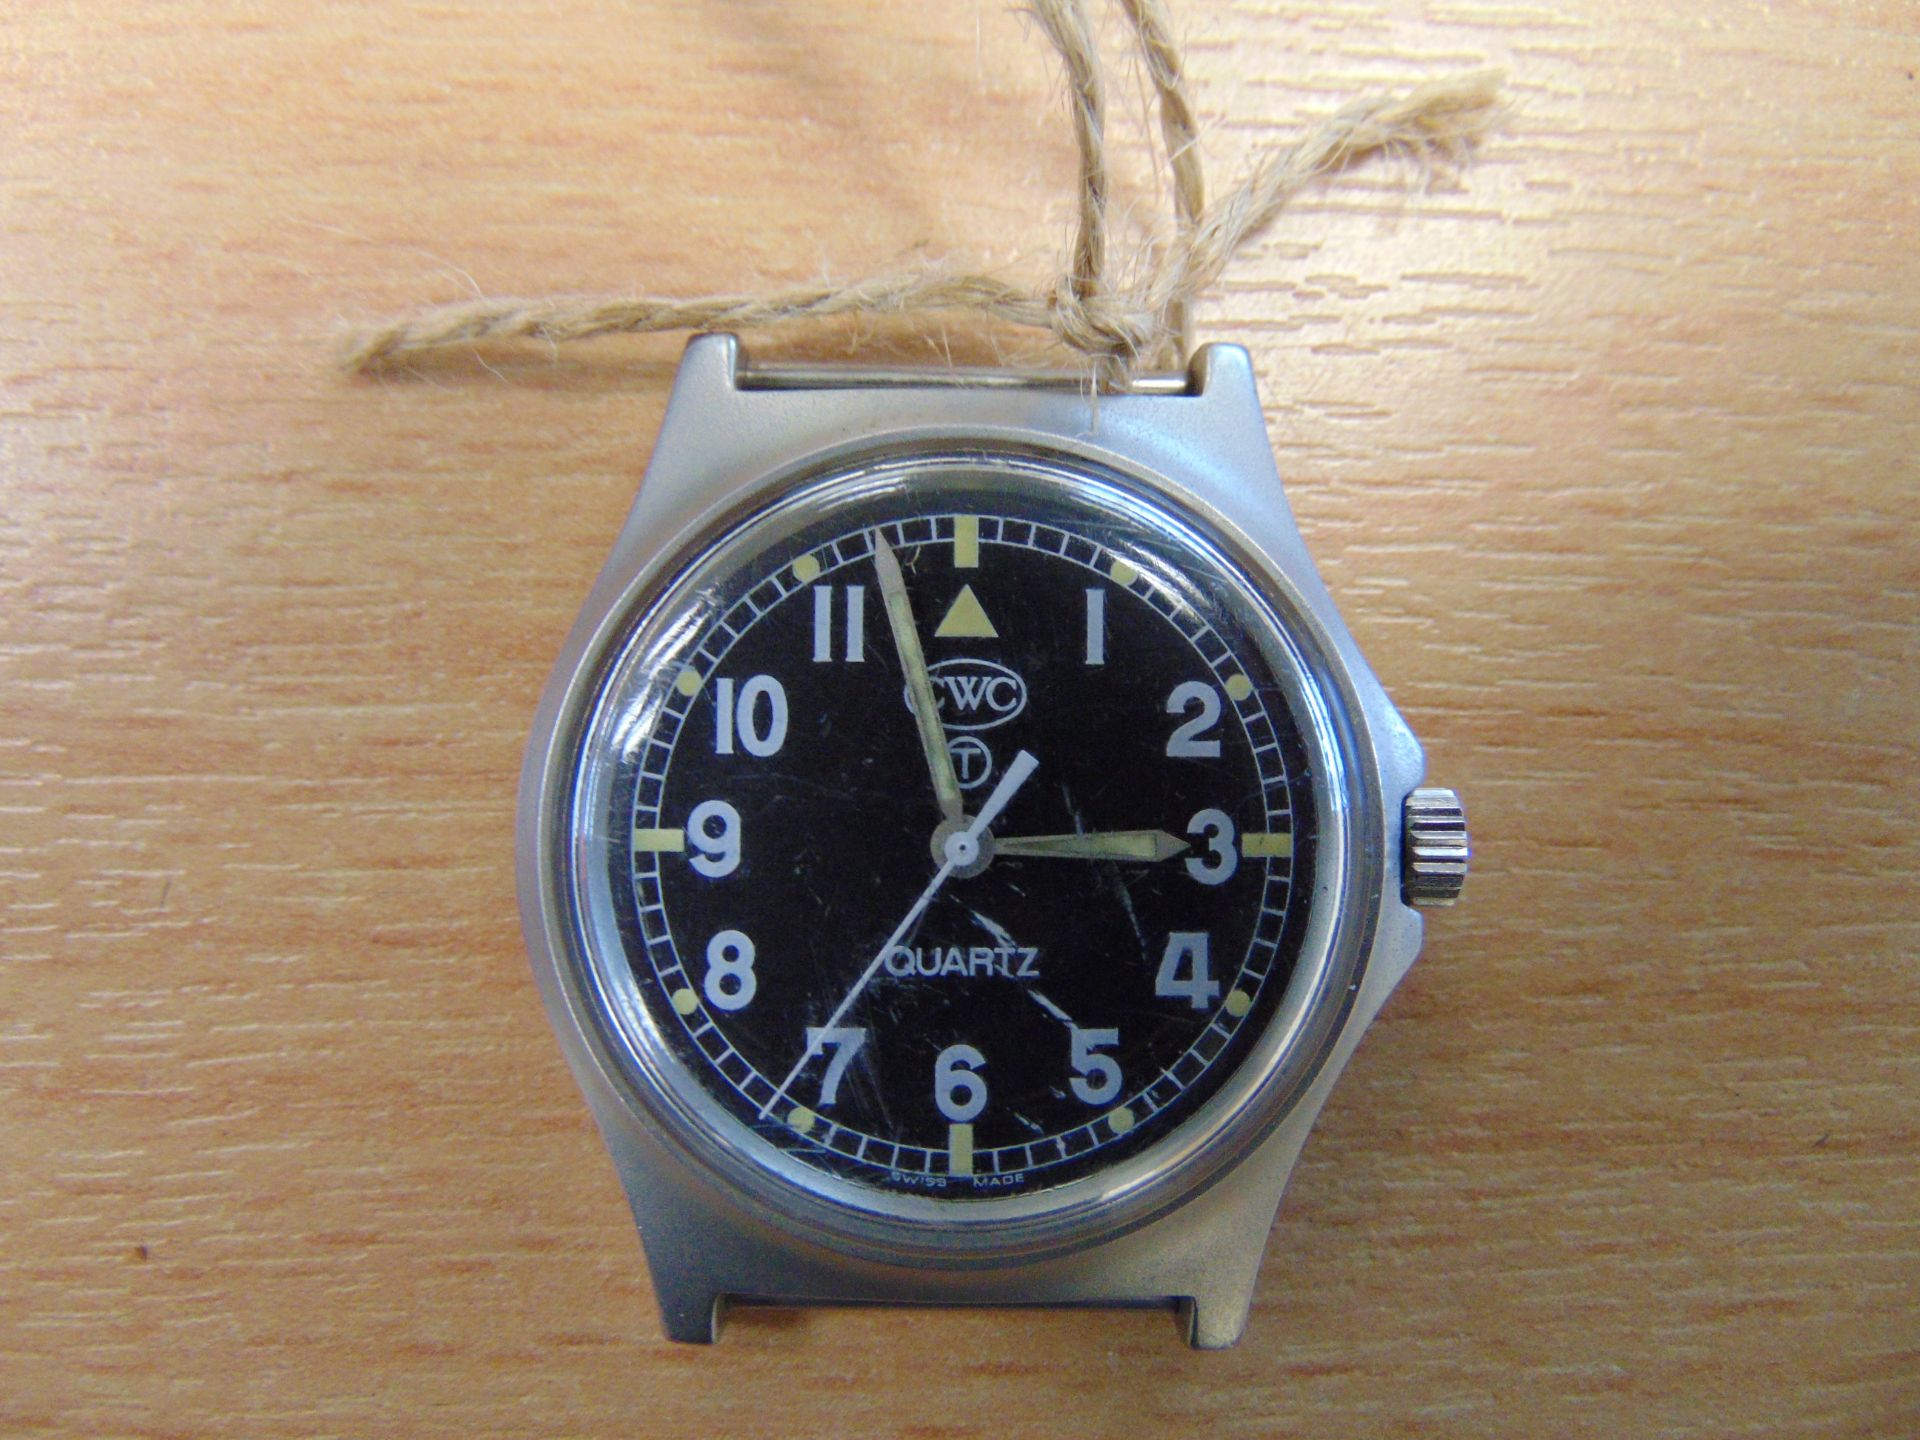 CWC (Cabot Watch Co Switzerland) British Army W10 Service Watch, Water Resistant to 5 ATM - Image 2 of 4